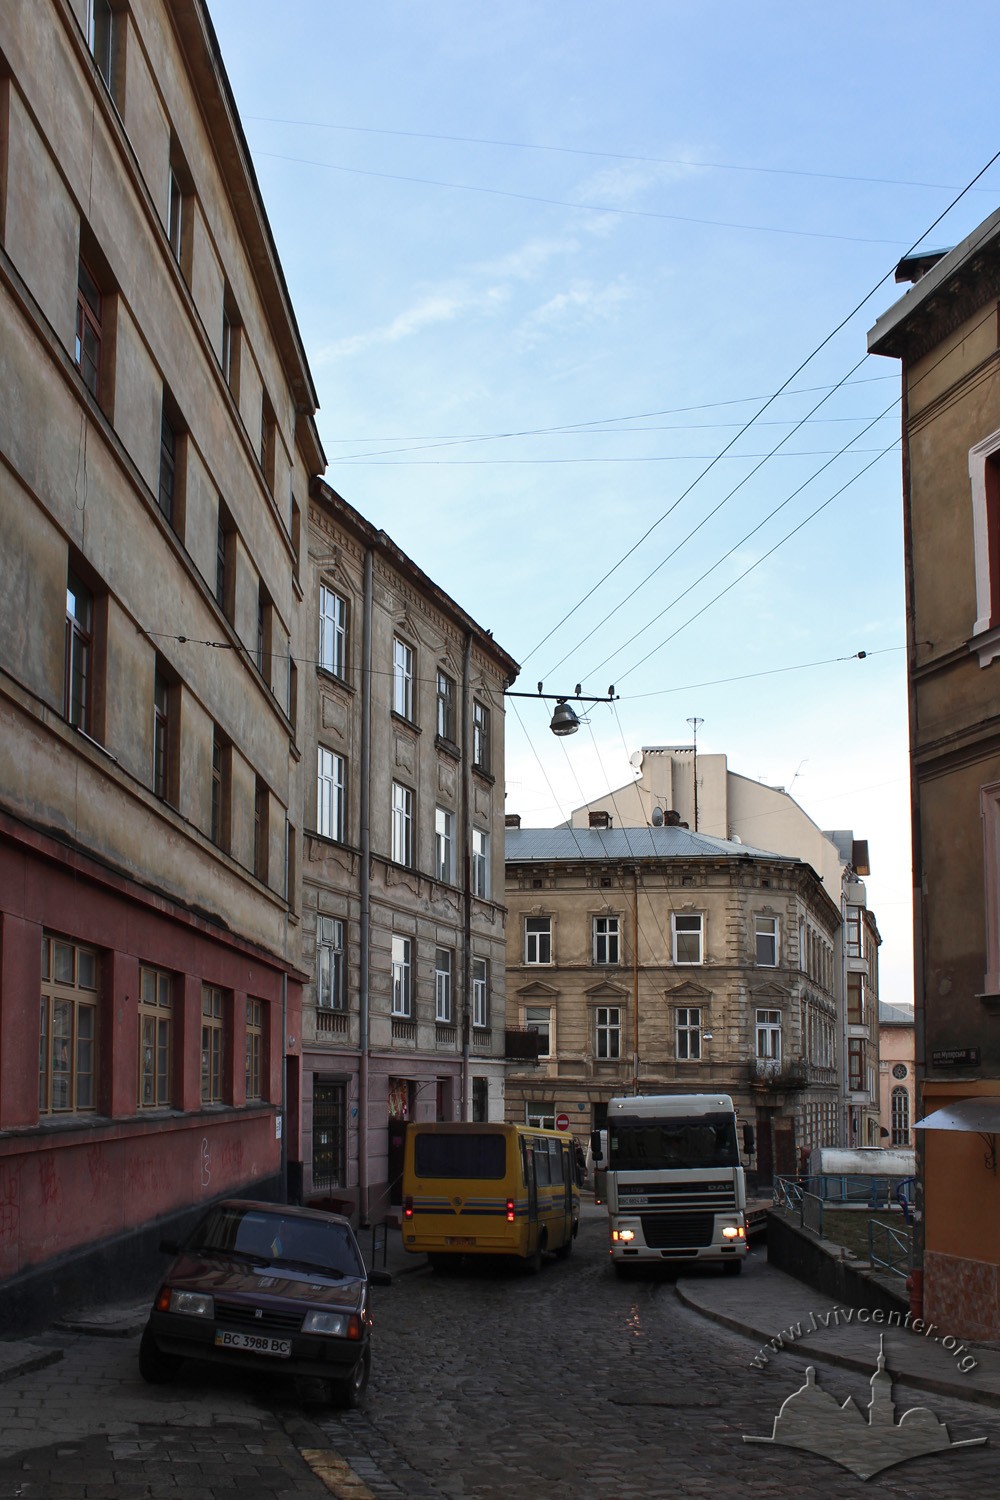 Vul. Starotandentna (Old Junkman's), now called vul. Muliarska. A view towards west and the Sv. Teodora square/Photo courtesy of Olha Zarechnyuk, 2016